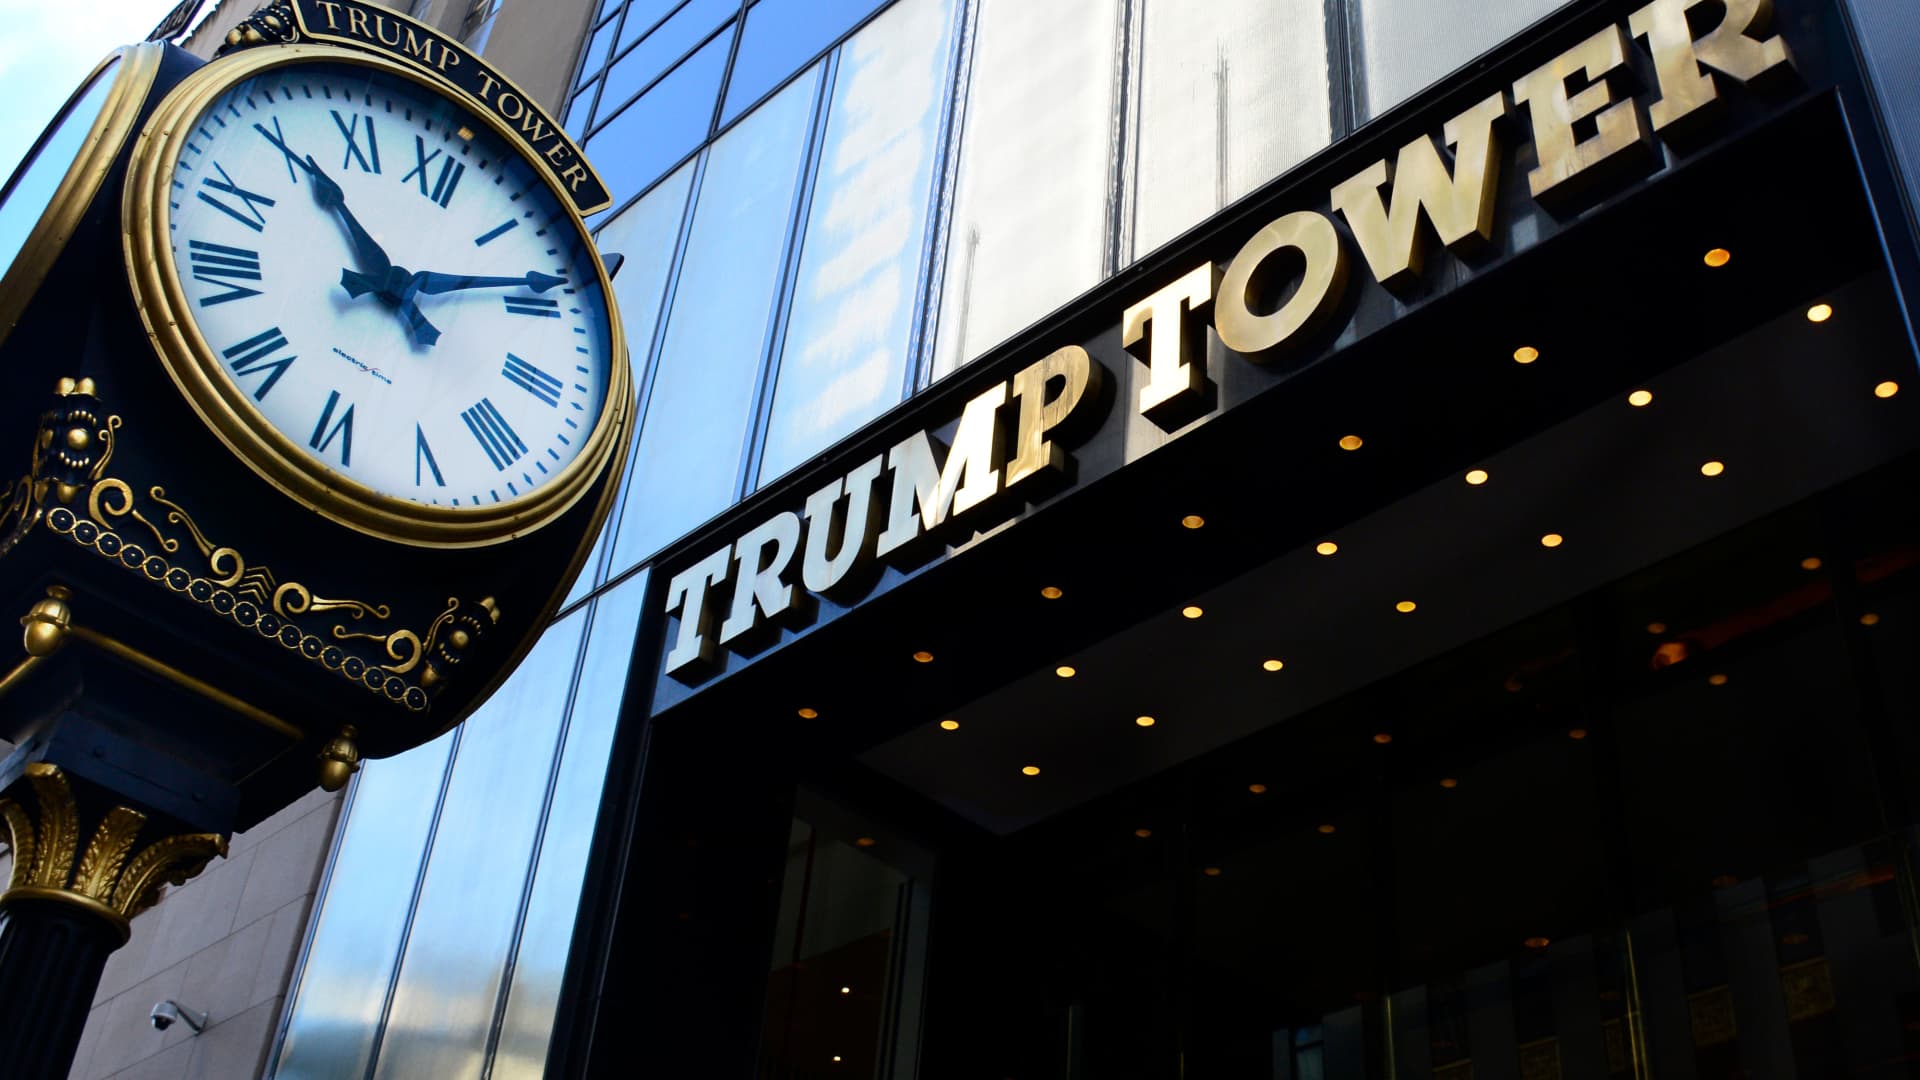 Judge appoints independent monitor to oversee Trump Org financial reporting in NY AG fraud suit